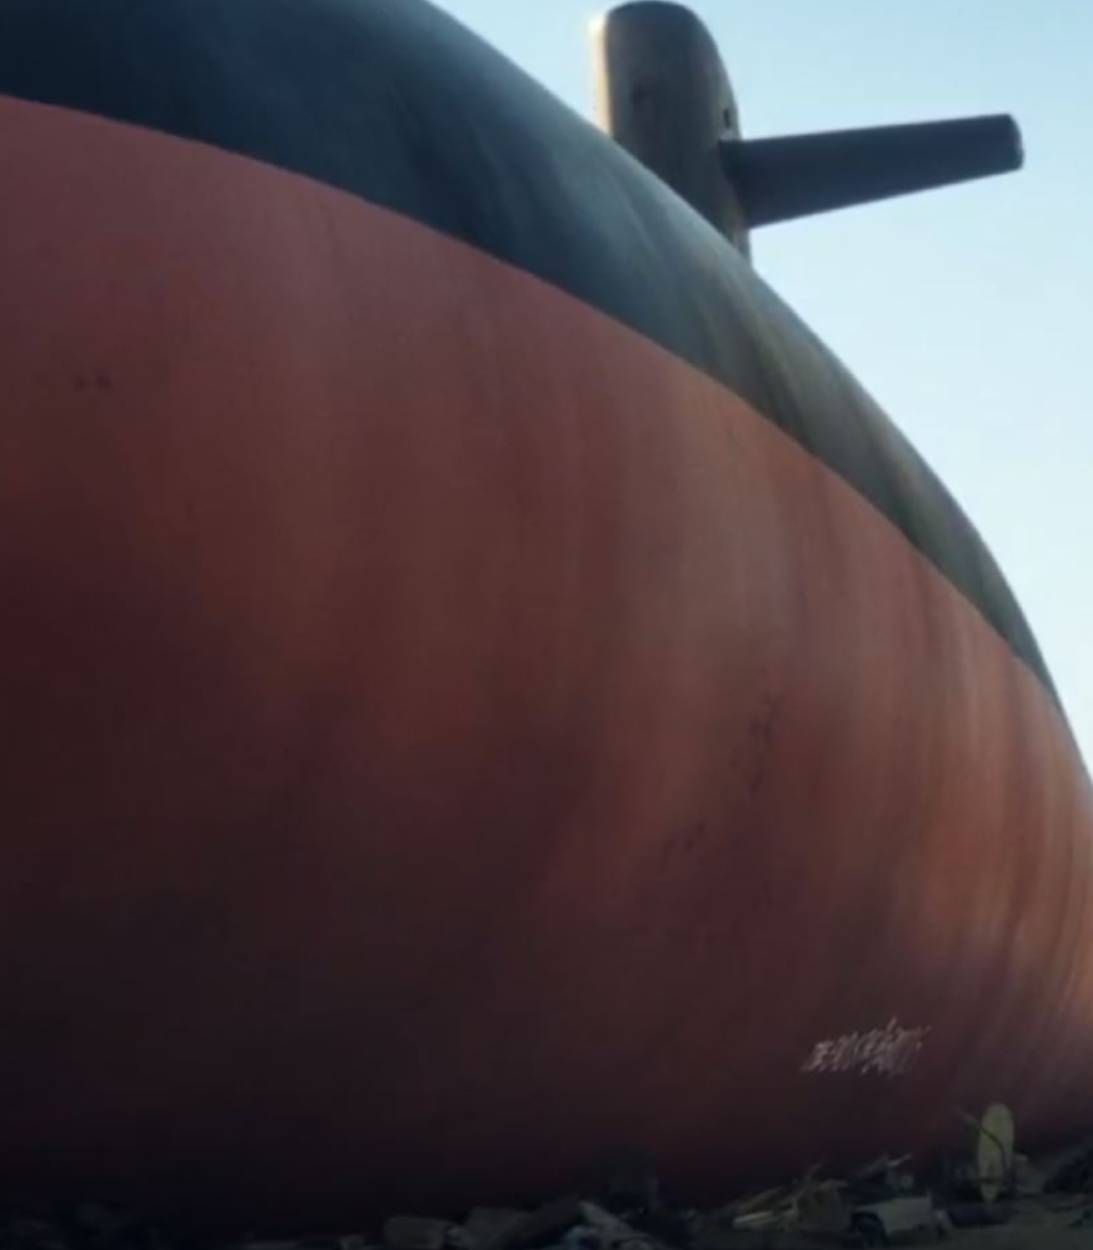 Submarine in Fear the Walking Dead pic vertical